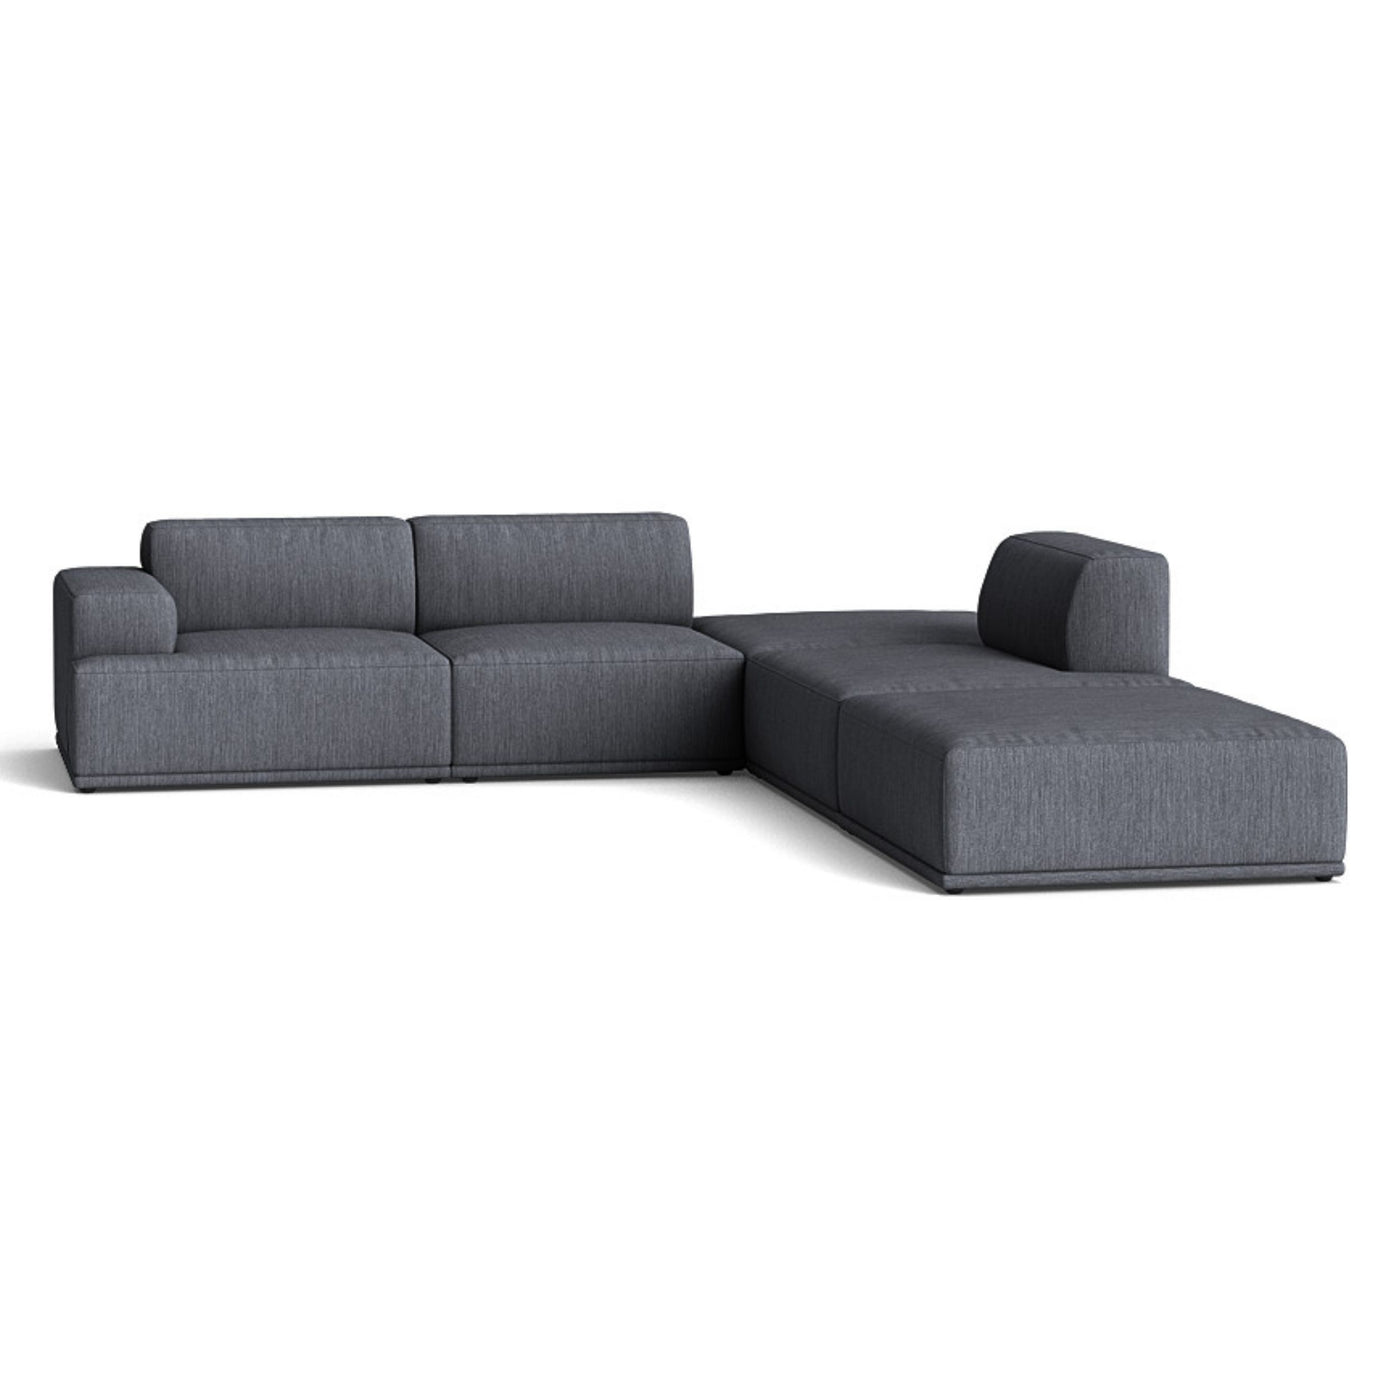 Muuto Connect Soft Modular Corner Sofa, configuration 3. made-to-order from someday designs. #colour_balder-152